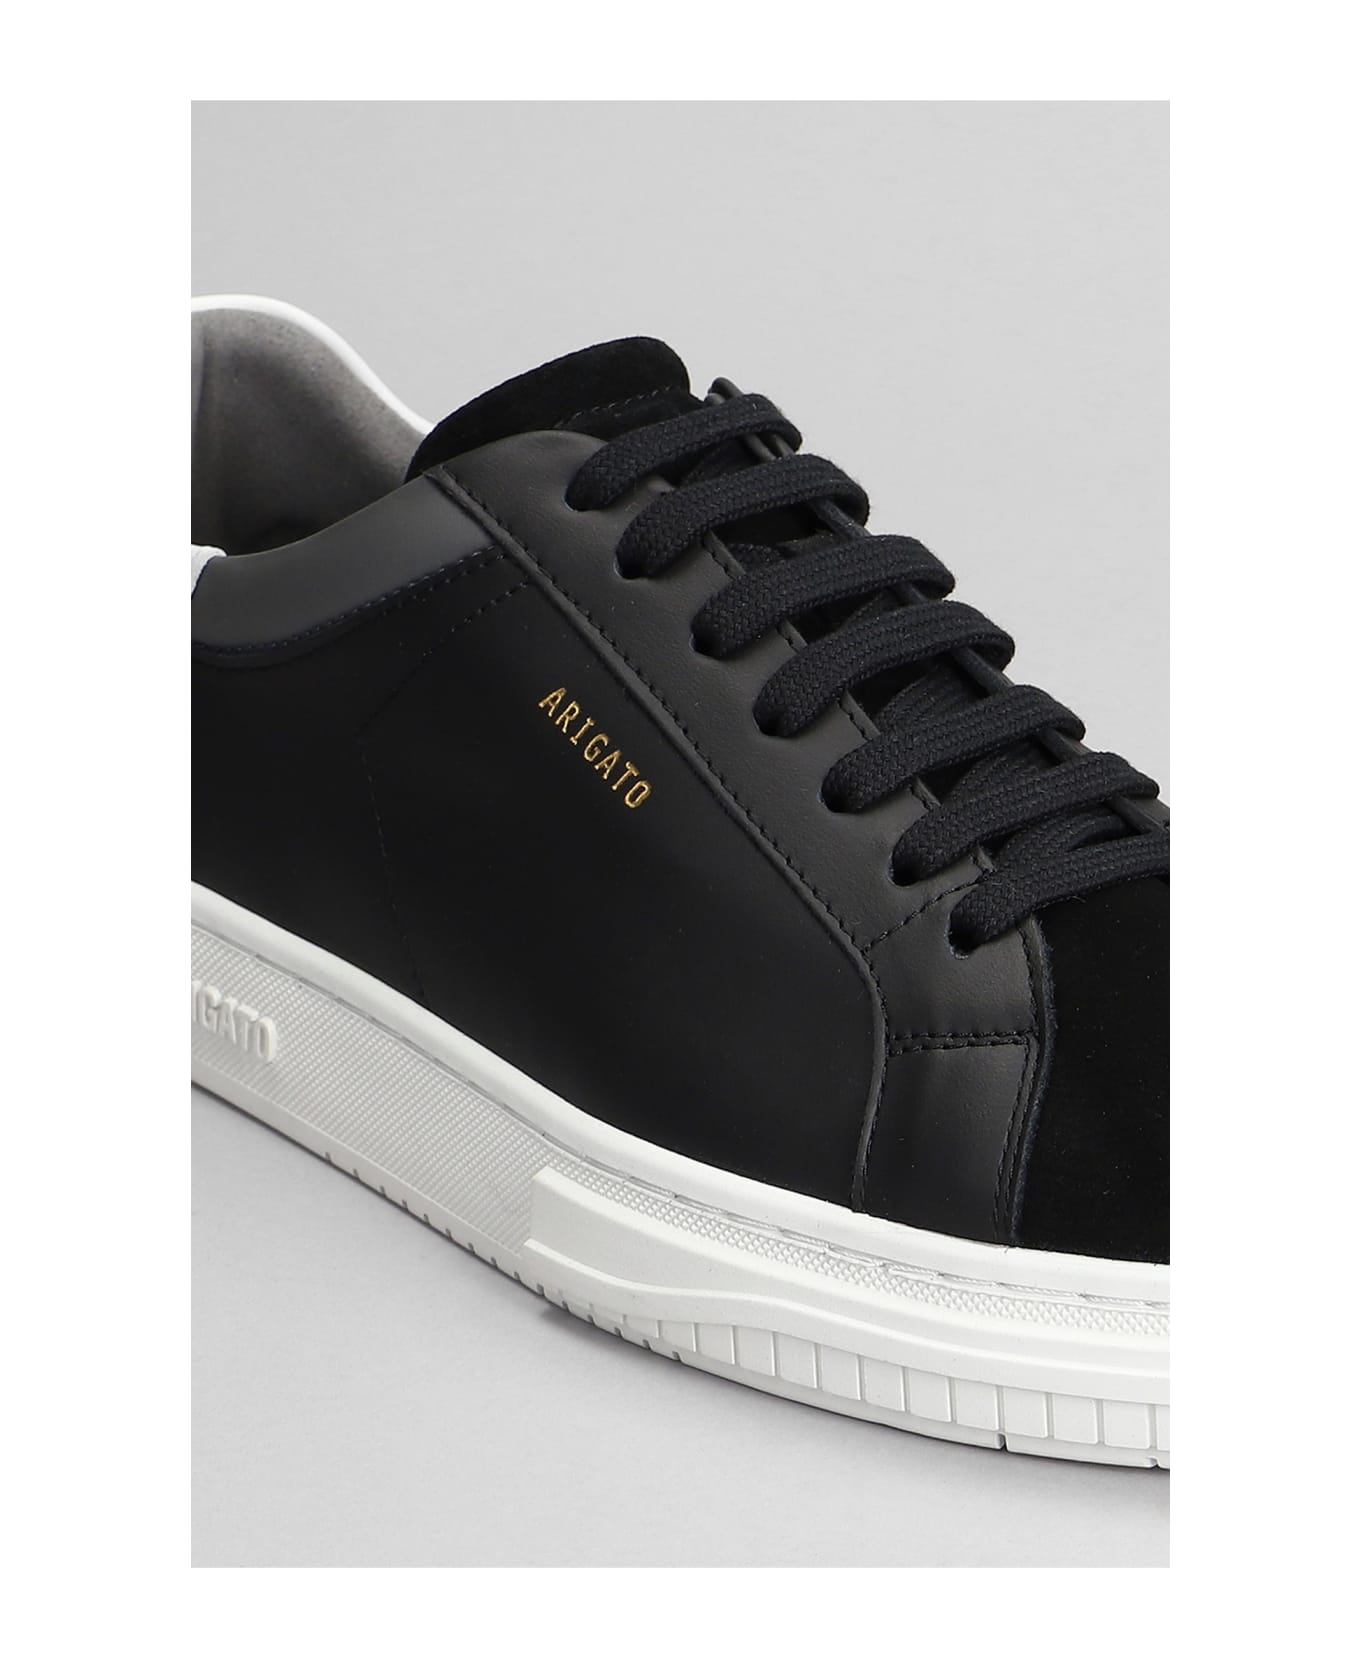 Axel Arigato Atlas Sneakers In Black Suede And Leather - black スニーカー